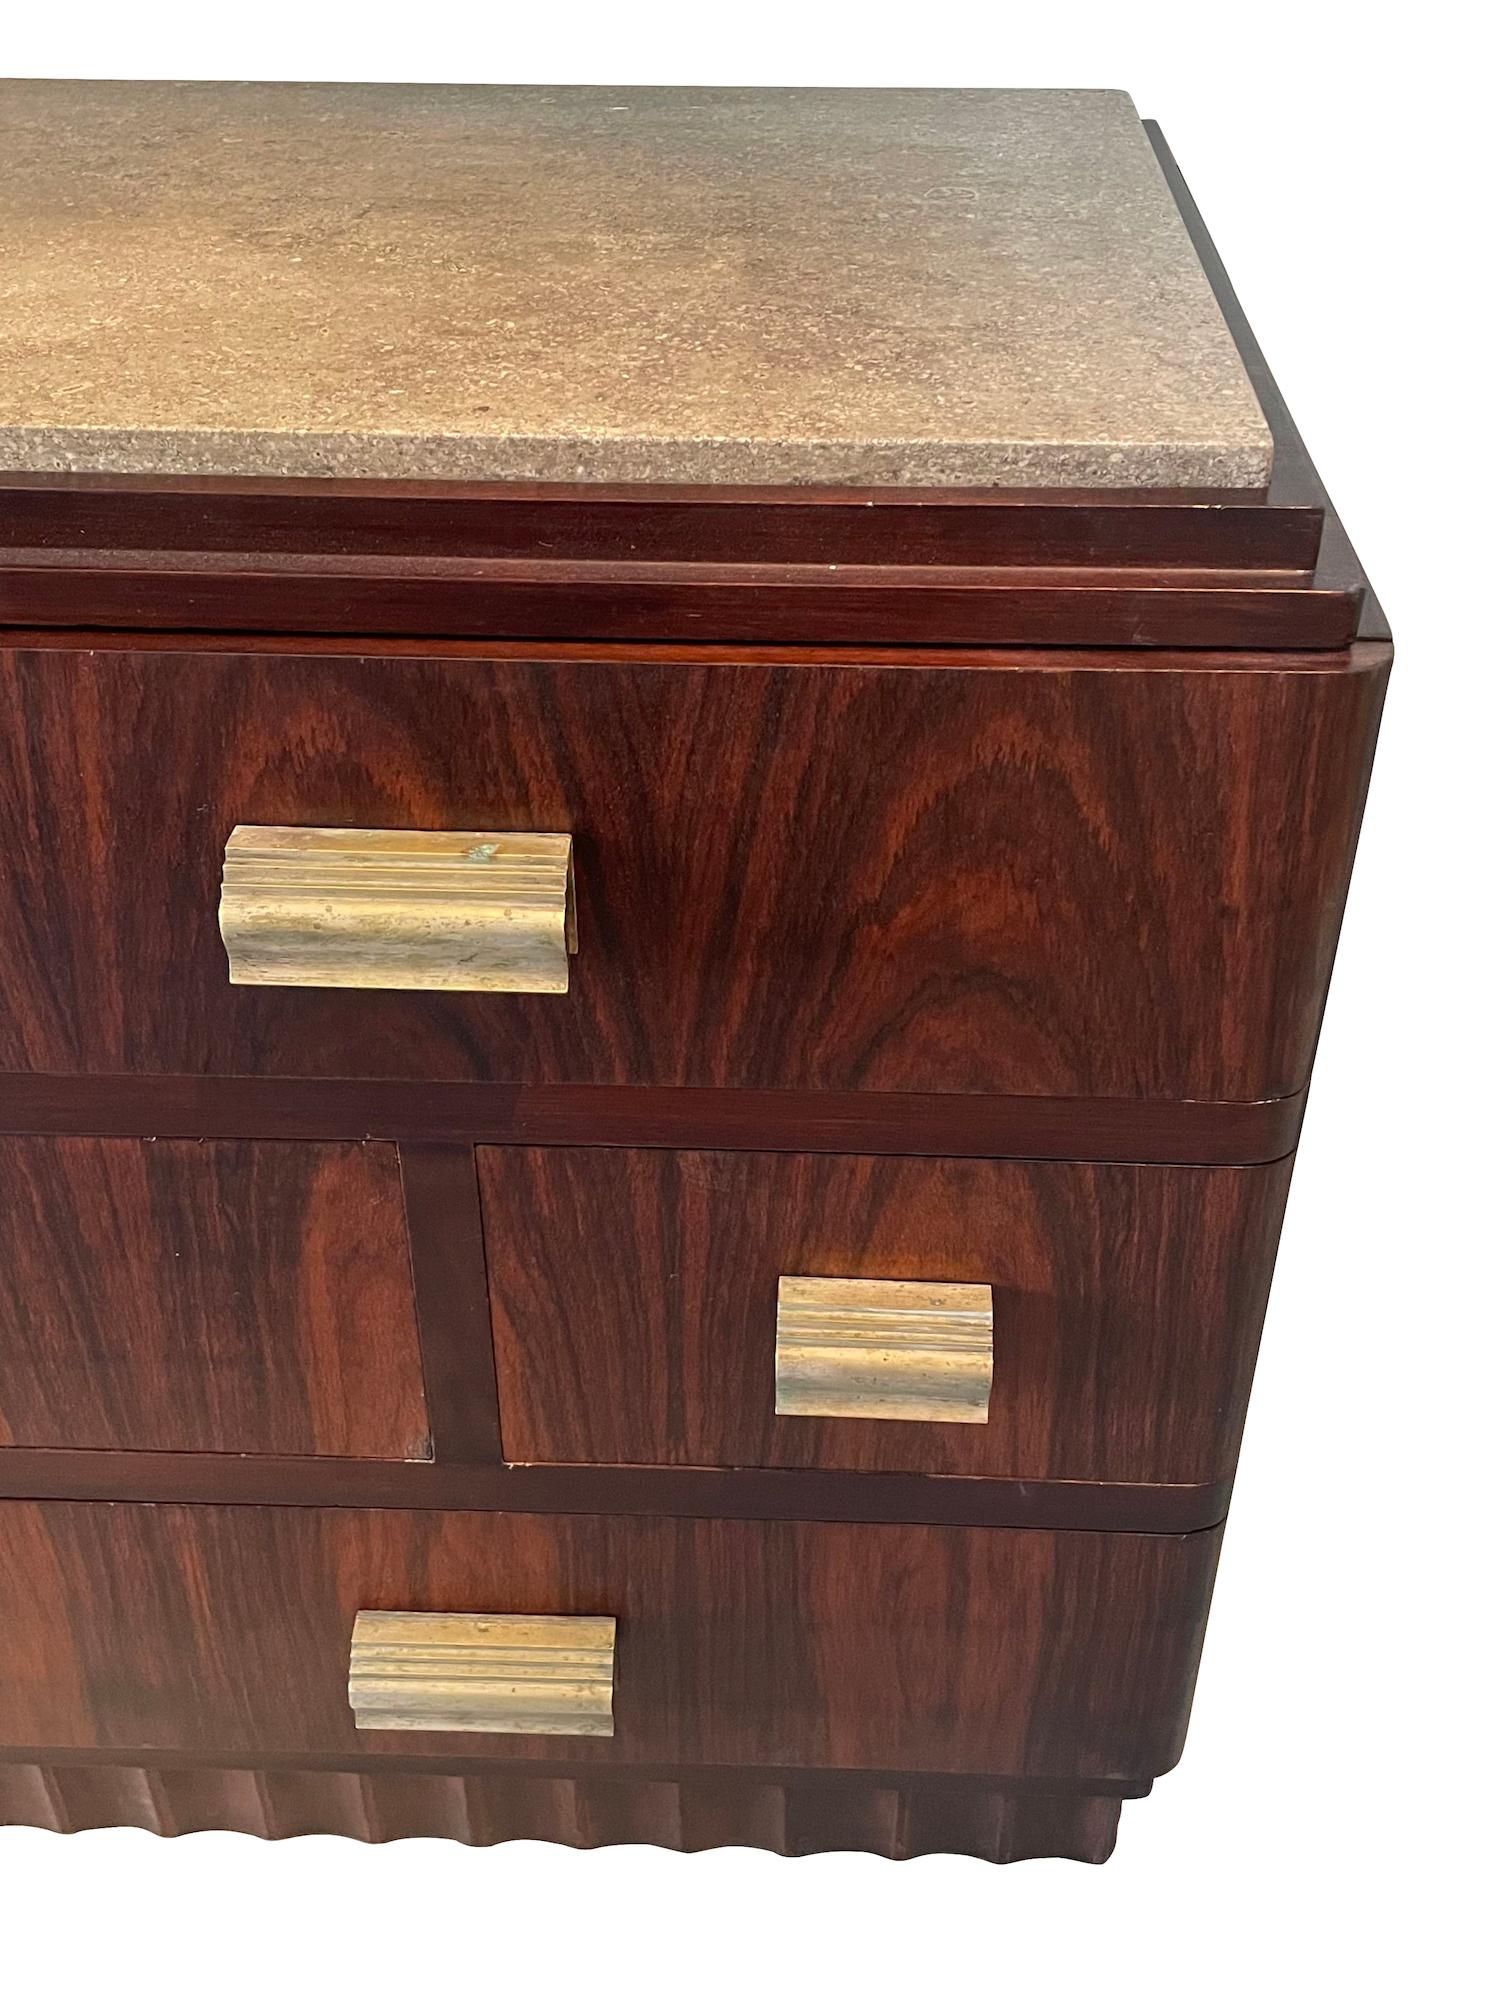 French Christian Krass Seven Drawer Marble Top Walnut Commode, France, 1930s For Sale